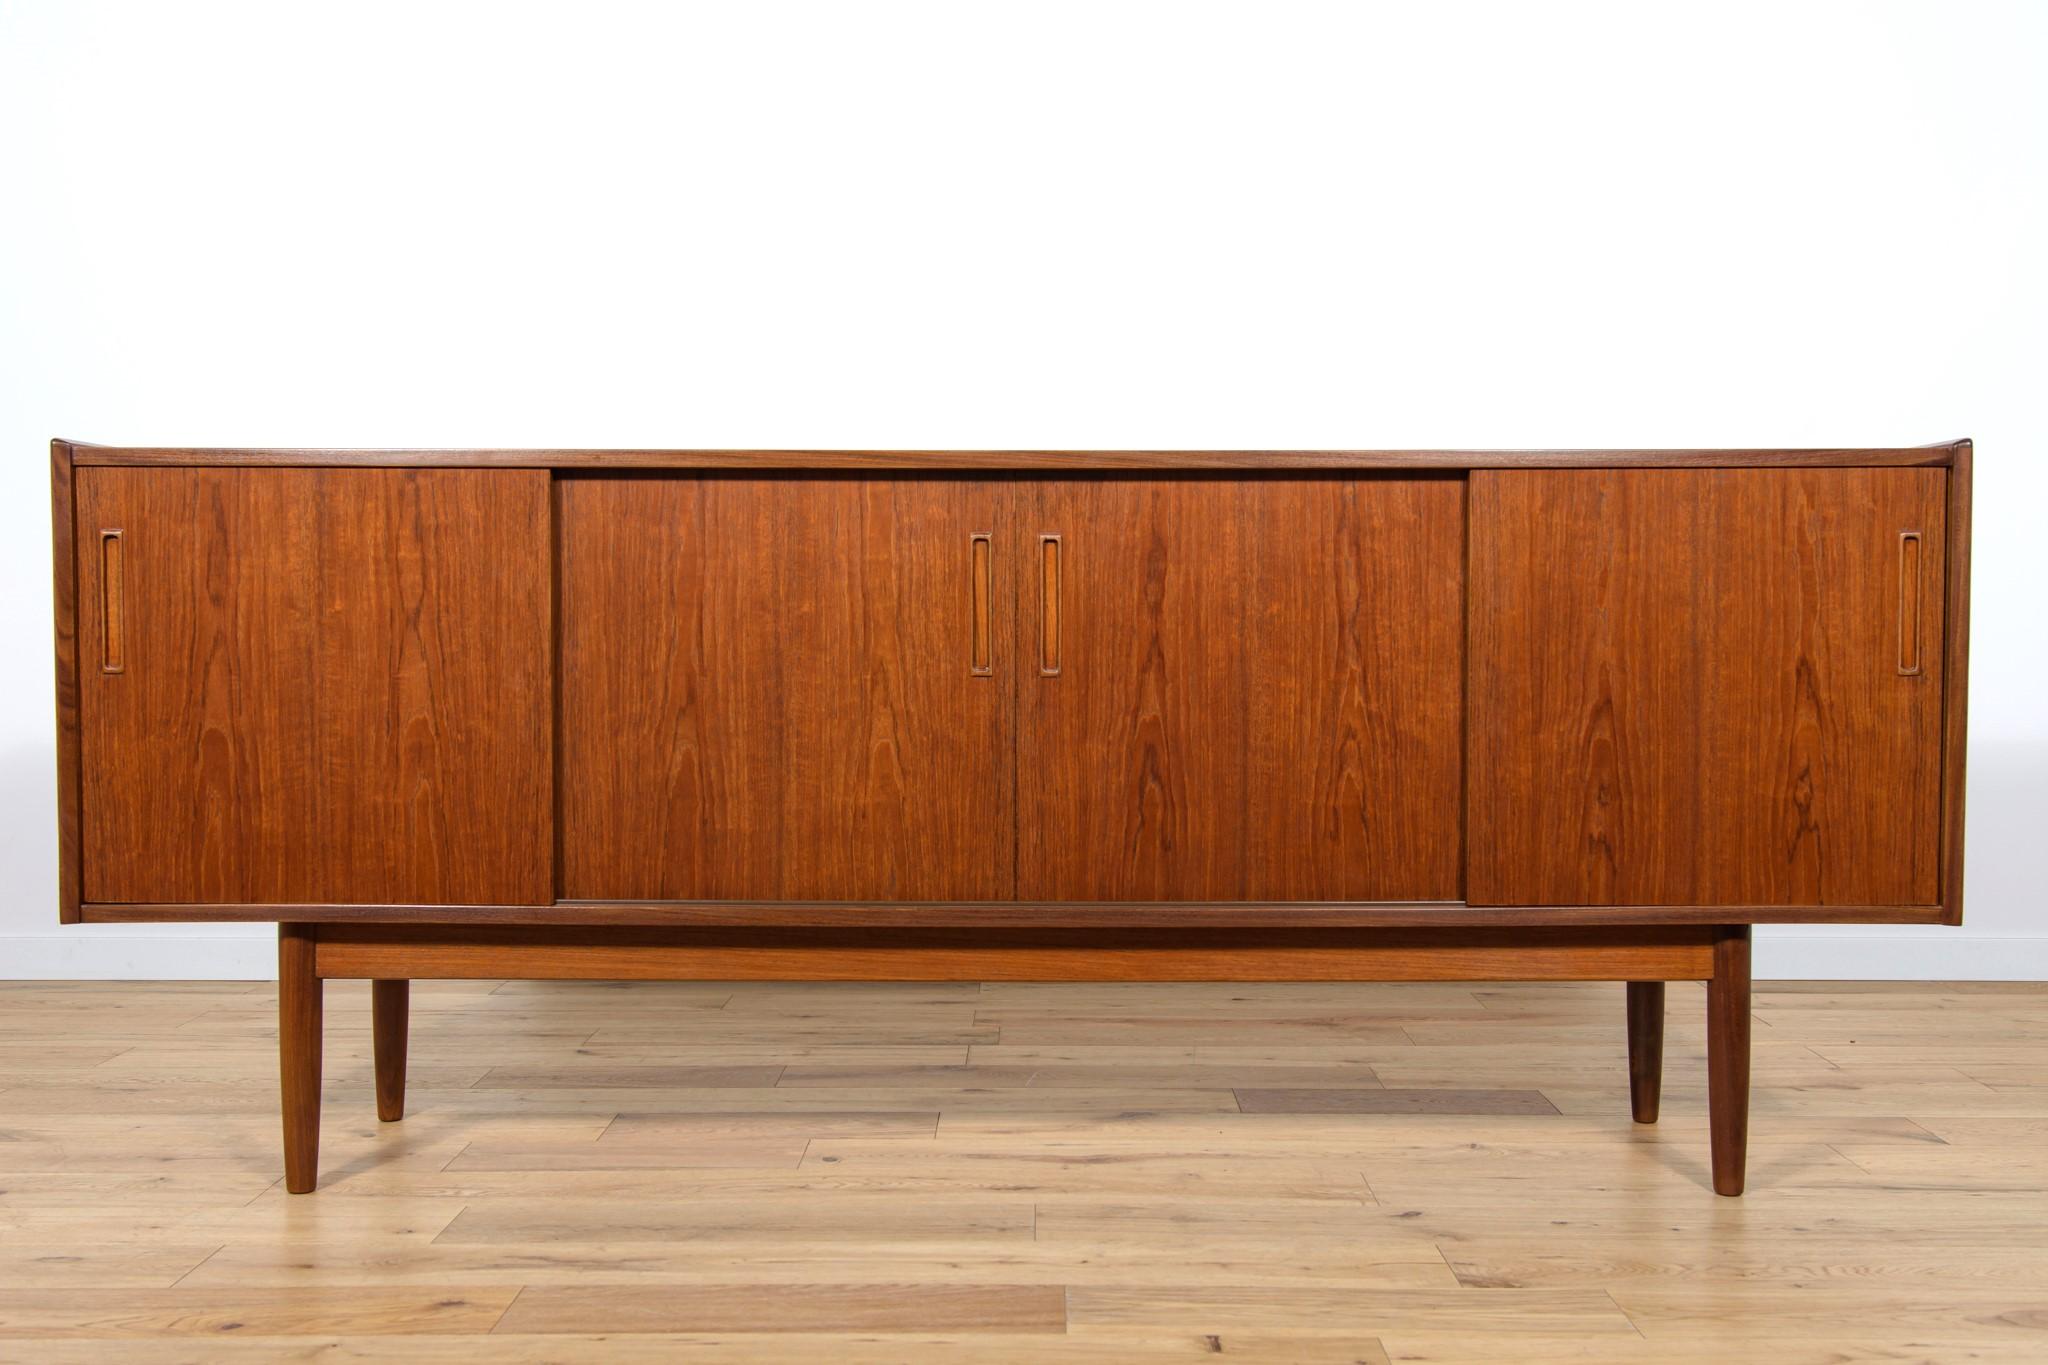 
Sideboard made in the 1960s in Denmark. Sideboard consists of four sliding doors, inside there are shelves and two drawers. The chest of drawers has profiled teak handles. The sideboard is after a comprehensive carpentry renovation. It has been